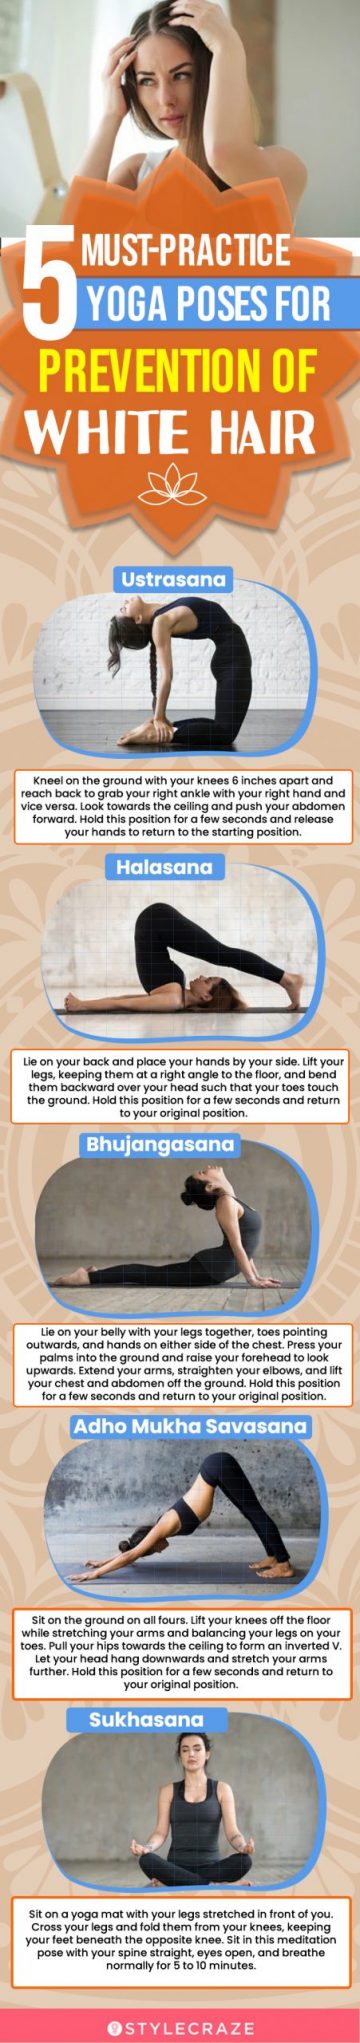 5 must practice yoga poses for prevention of white hair (infographic)